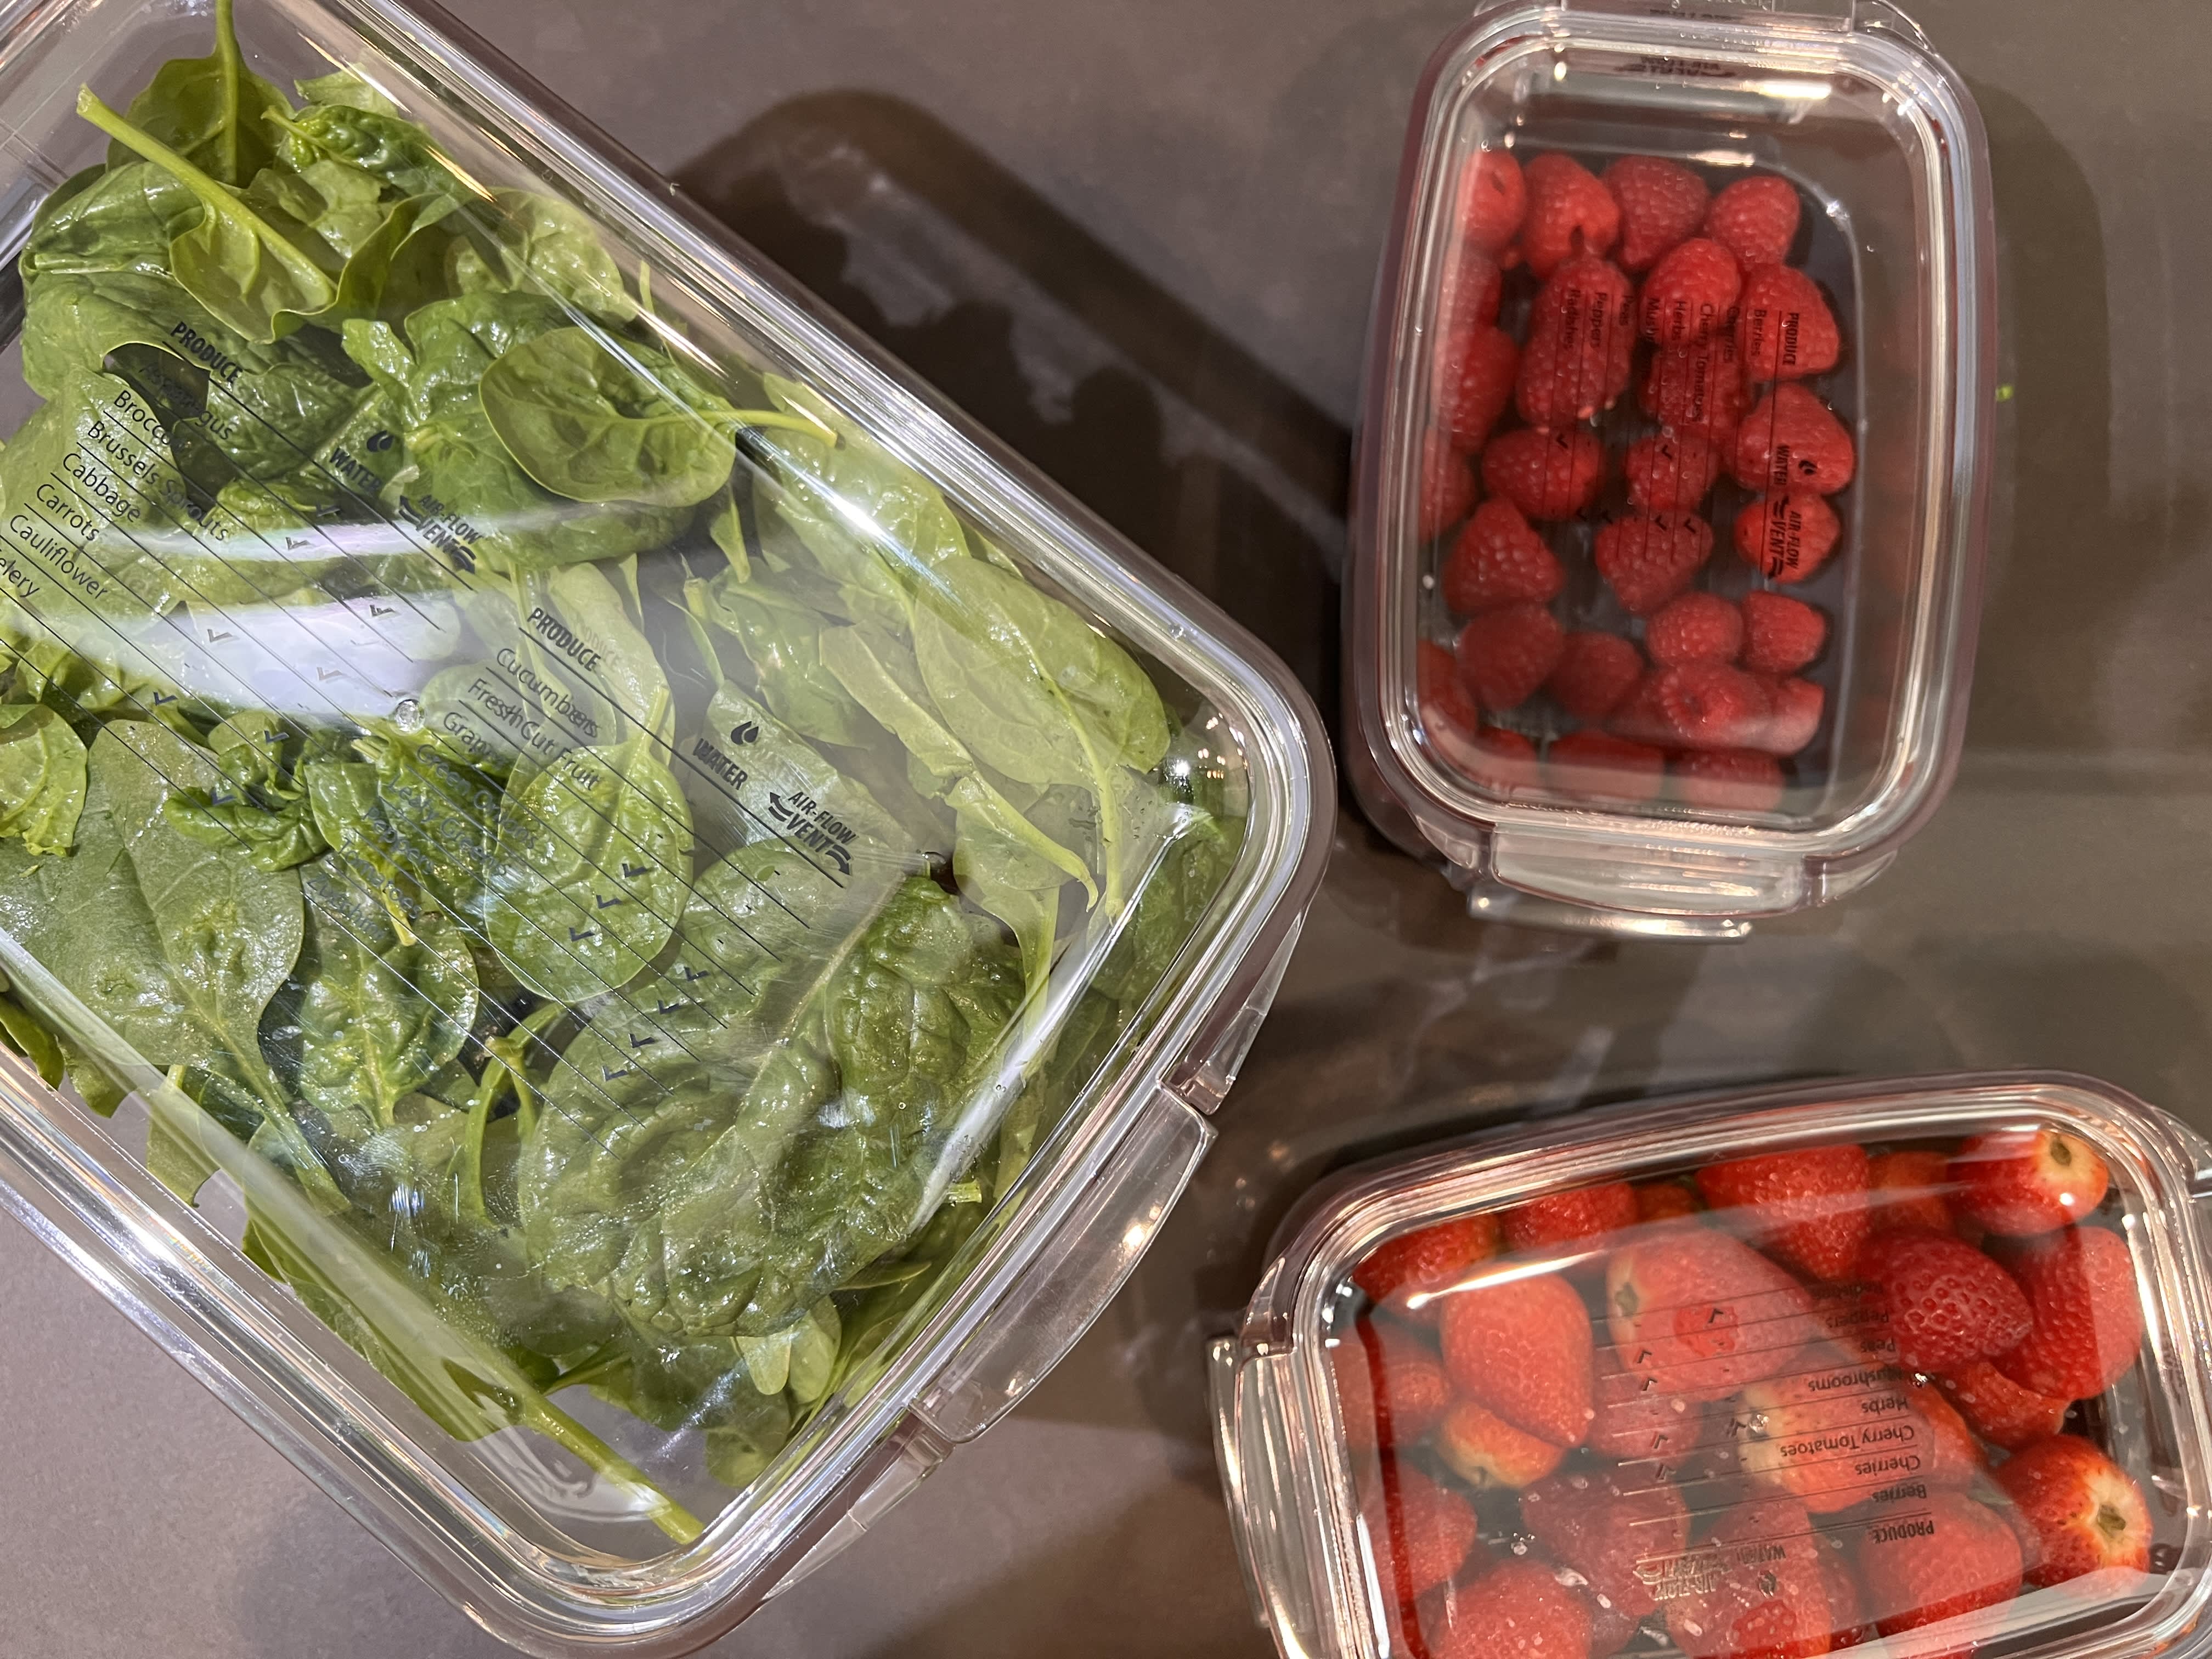 Costco Buys - This fresh produce keeper set is $19.99 and